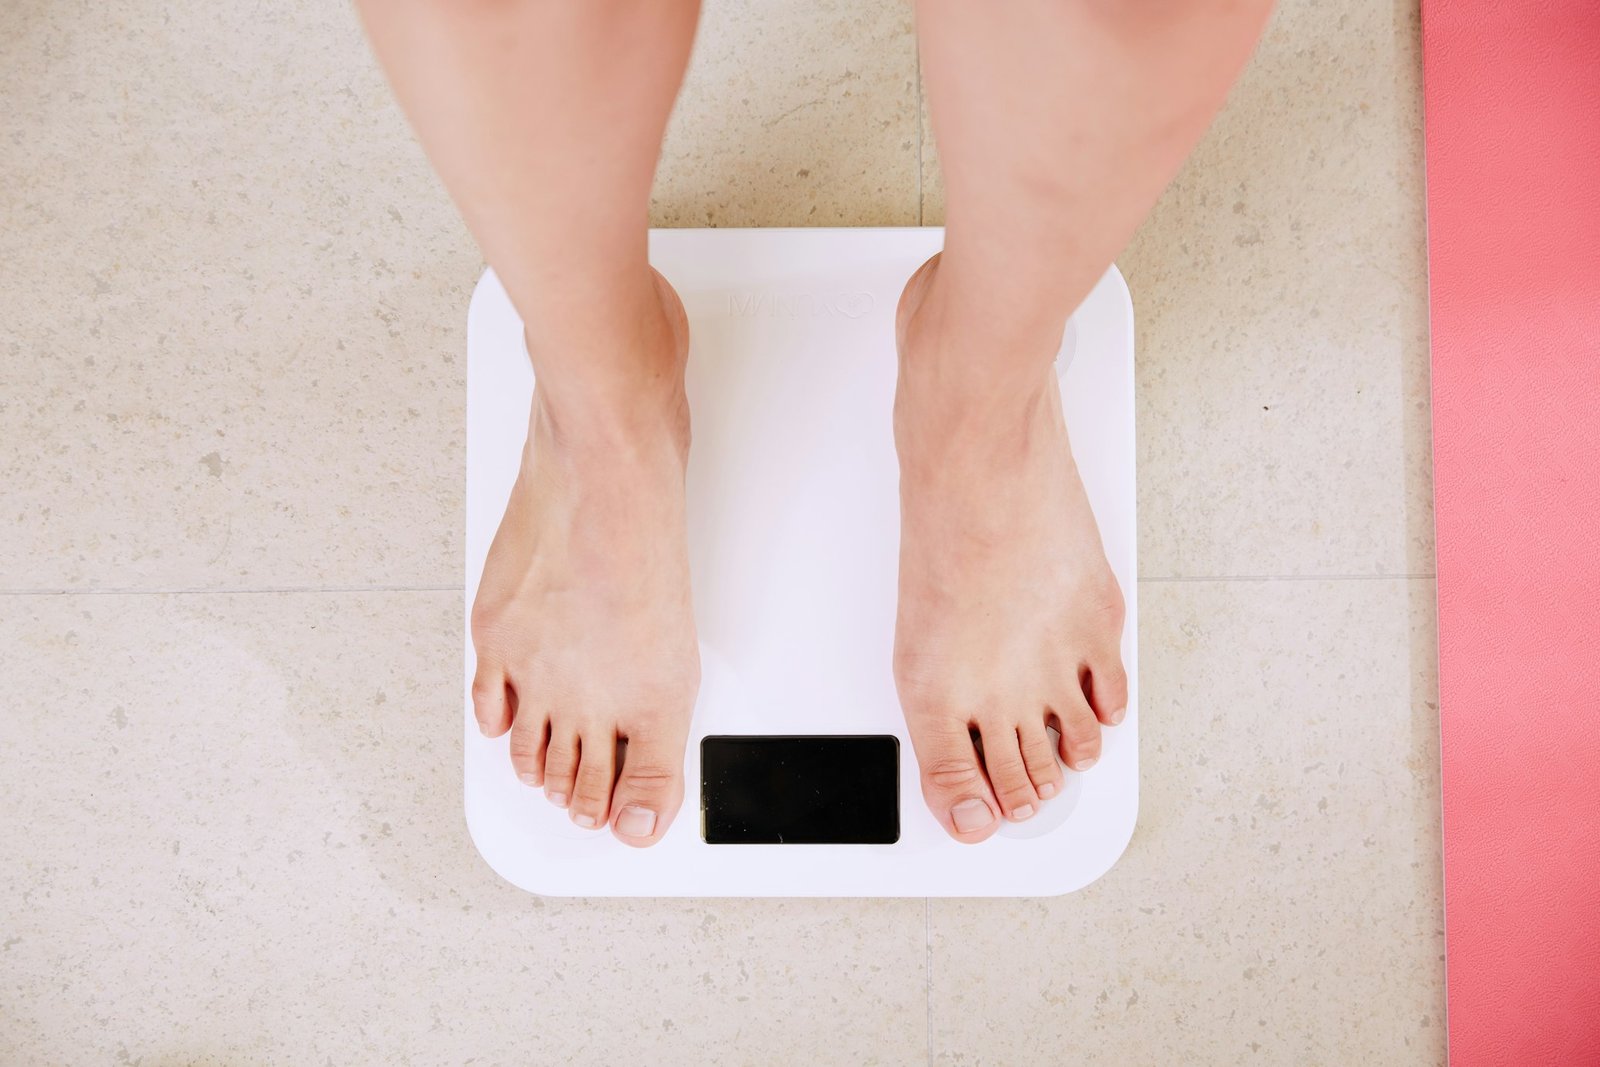 How the Quick Fix of Weight-Loss Drugs Can Lead to Long-Term Health Issues